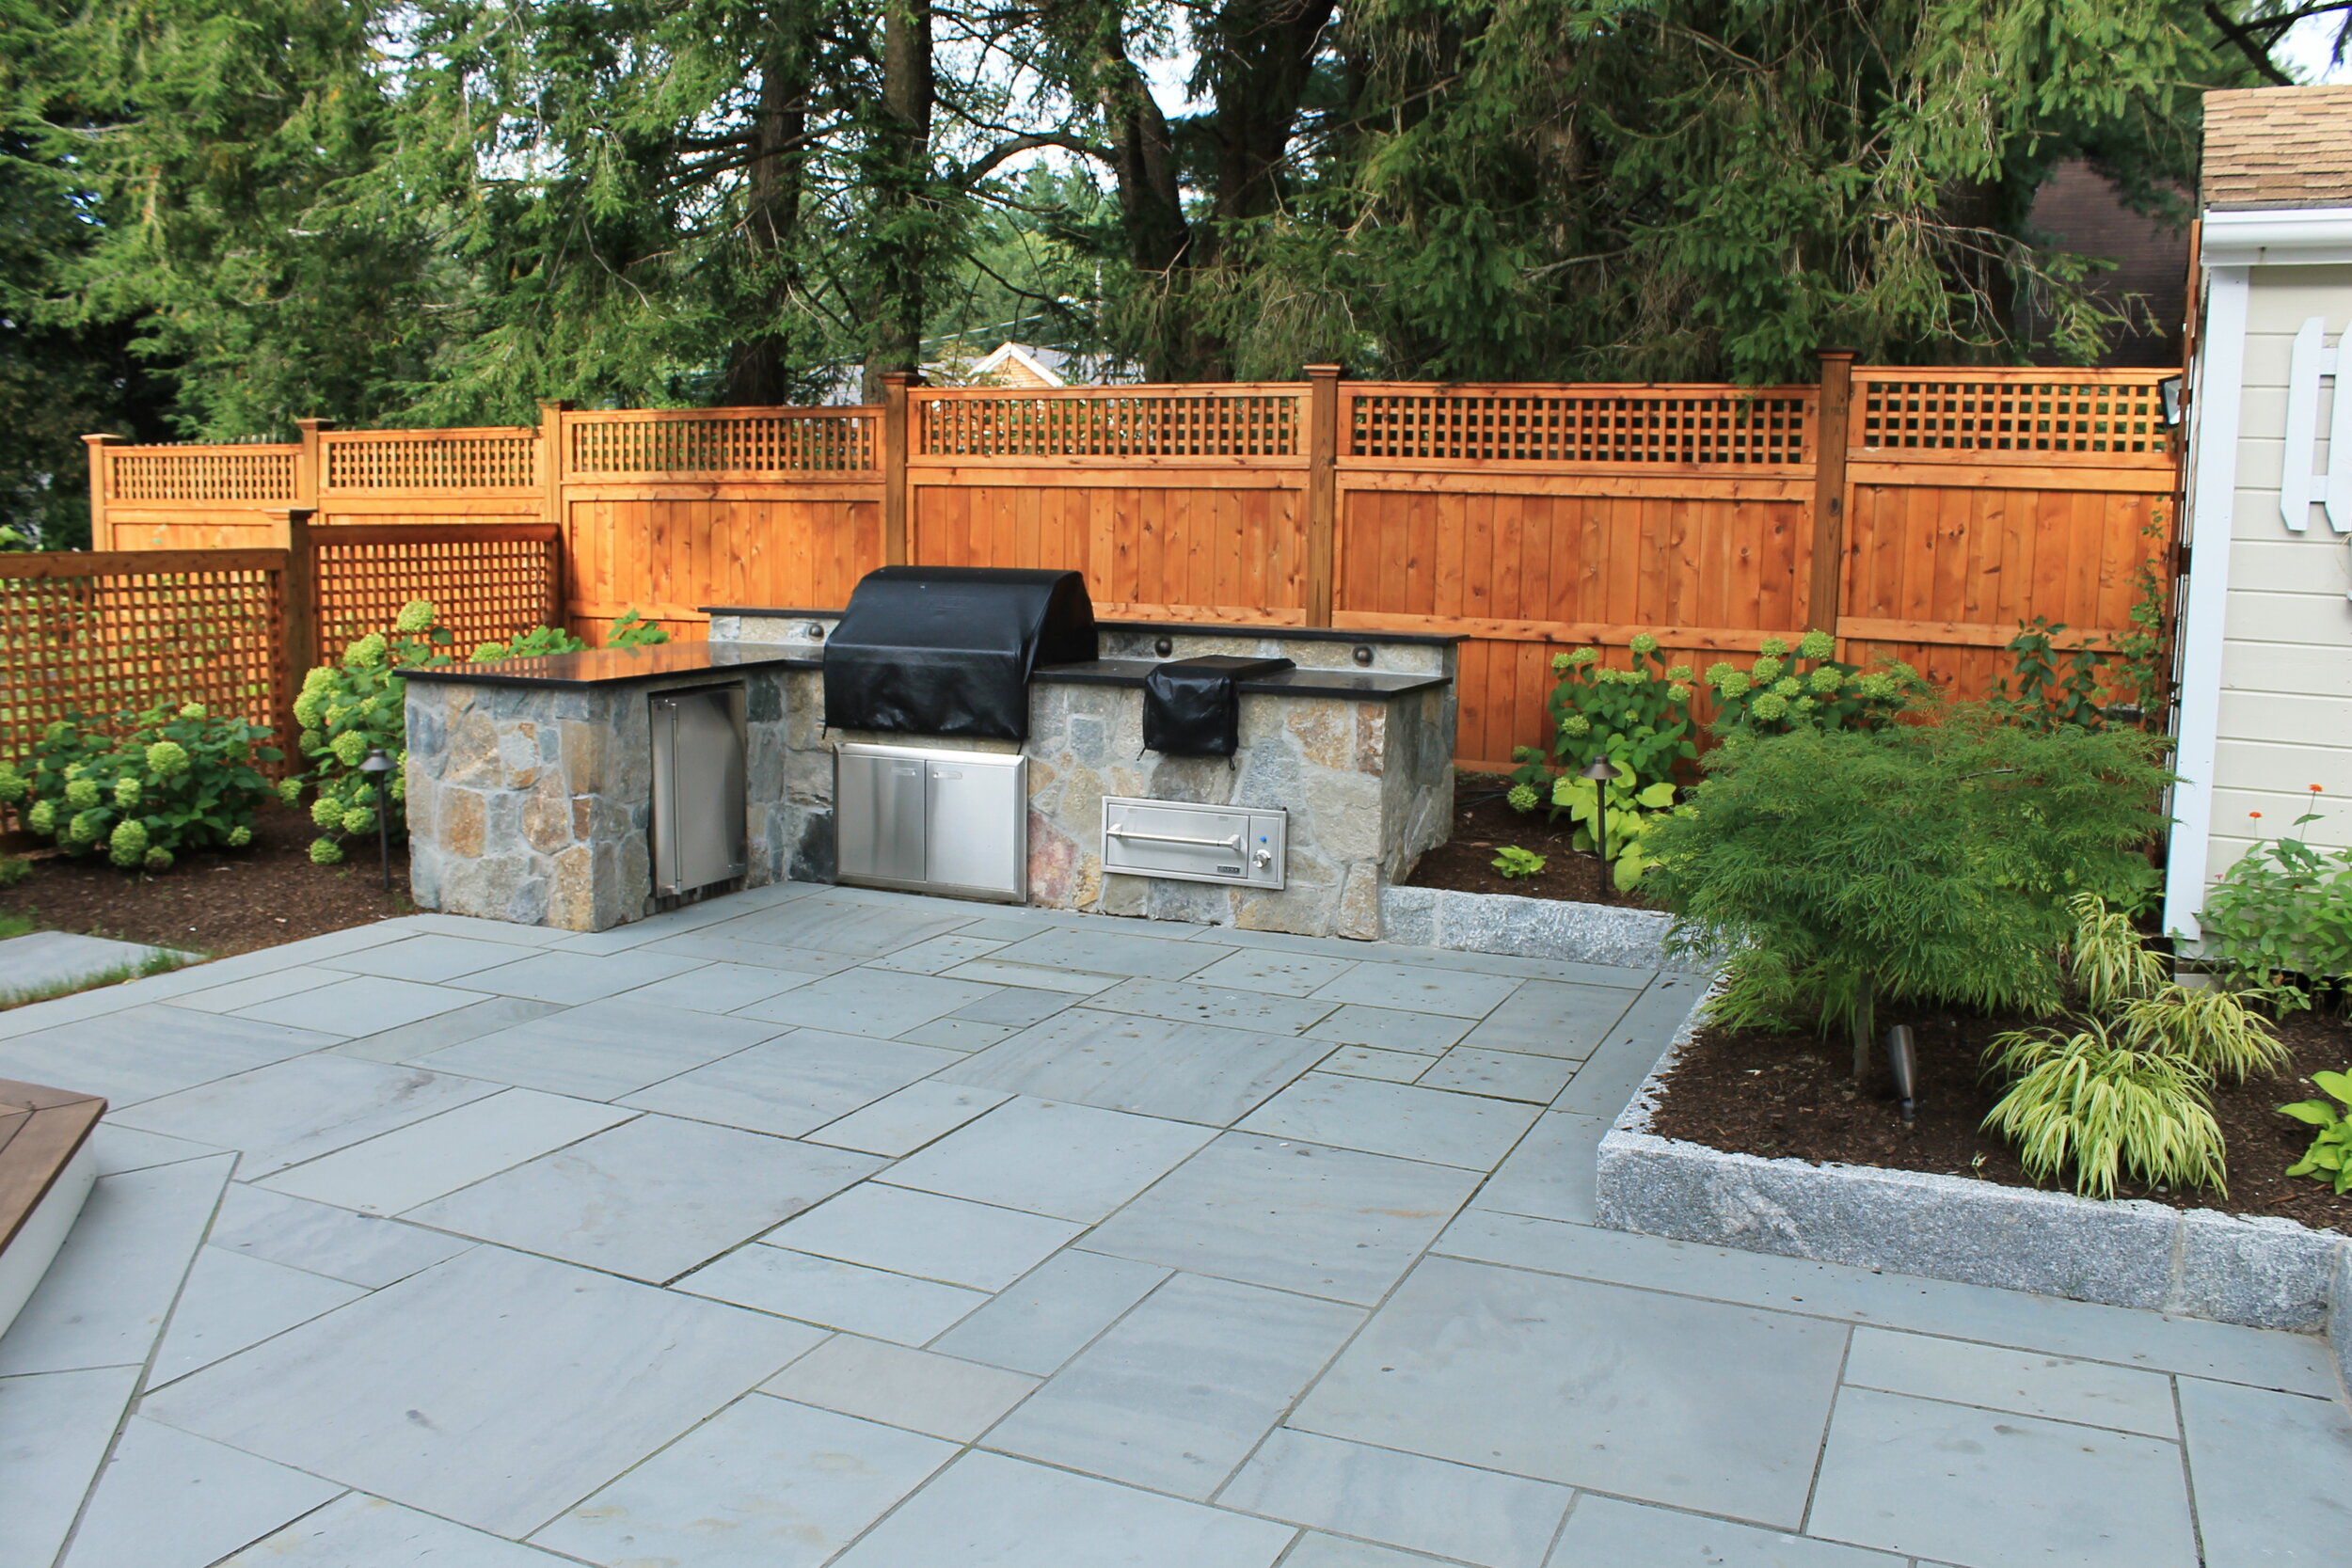 4 Landscape Design Features That Could Best Complement a Bluestone Patio in  Wellesley, MA Area